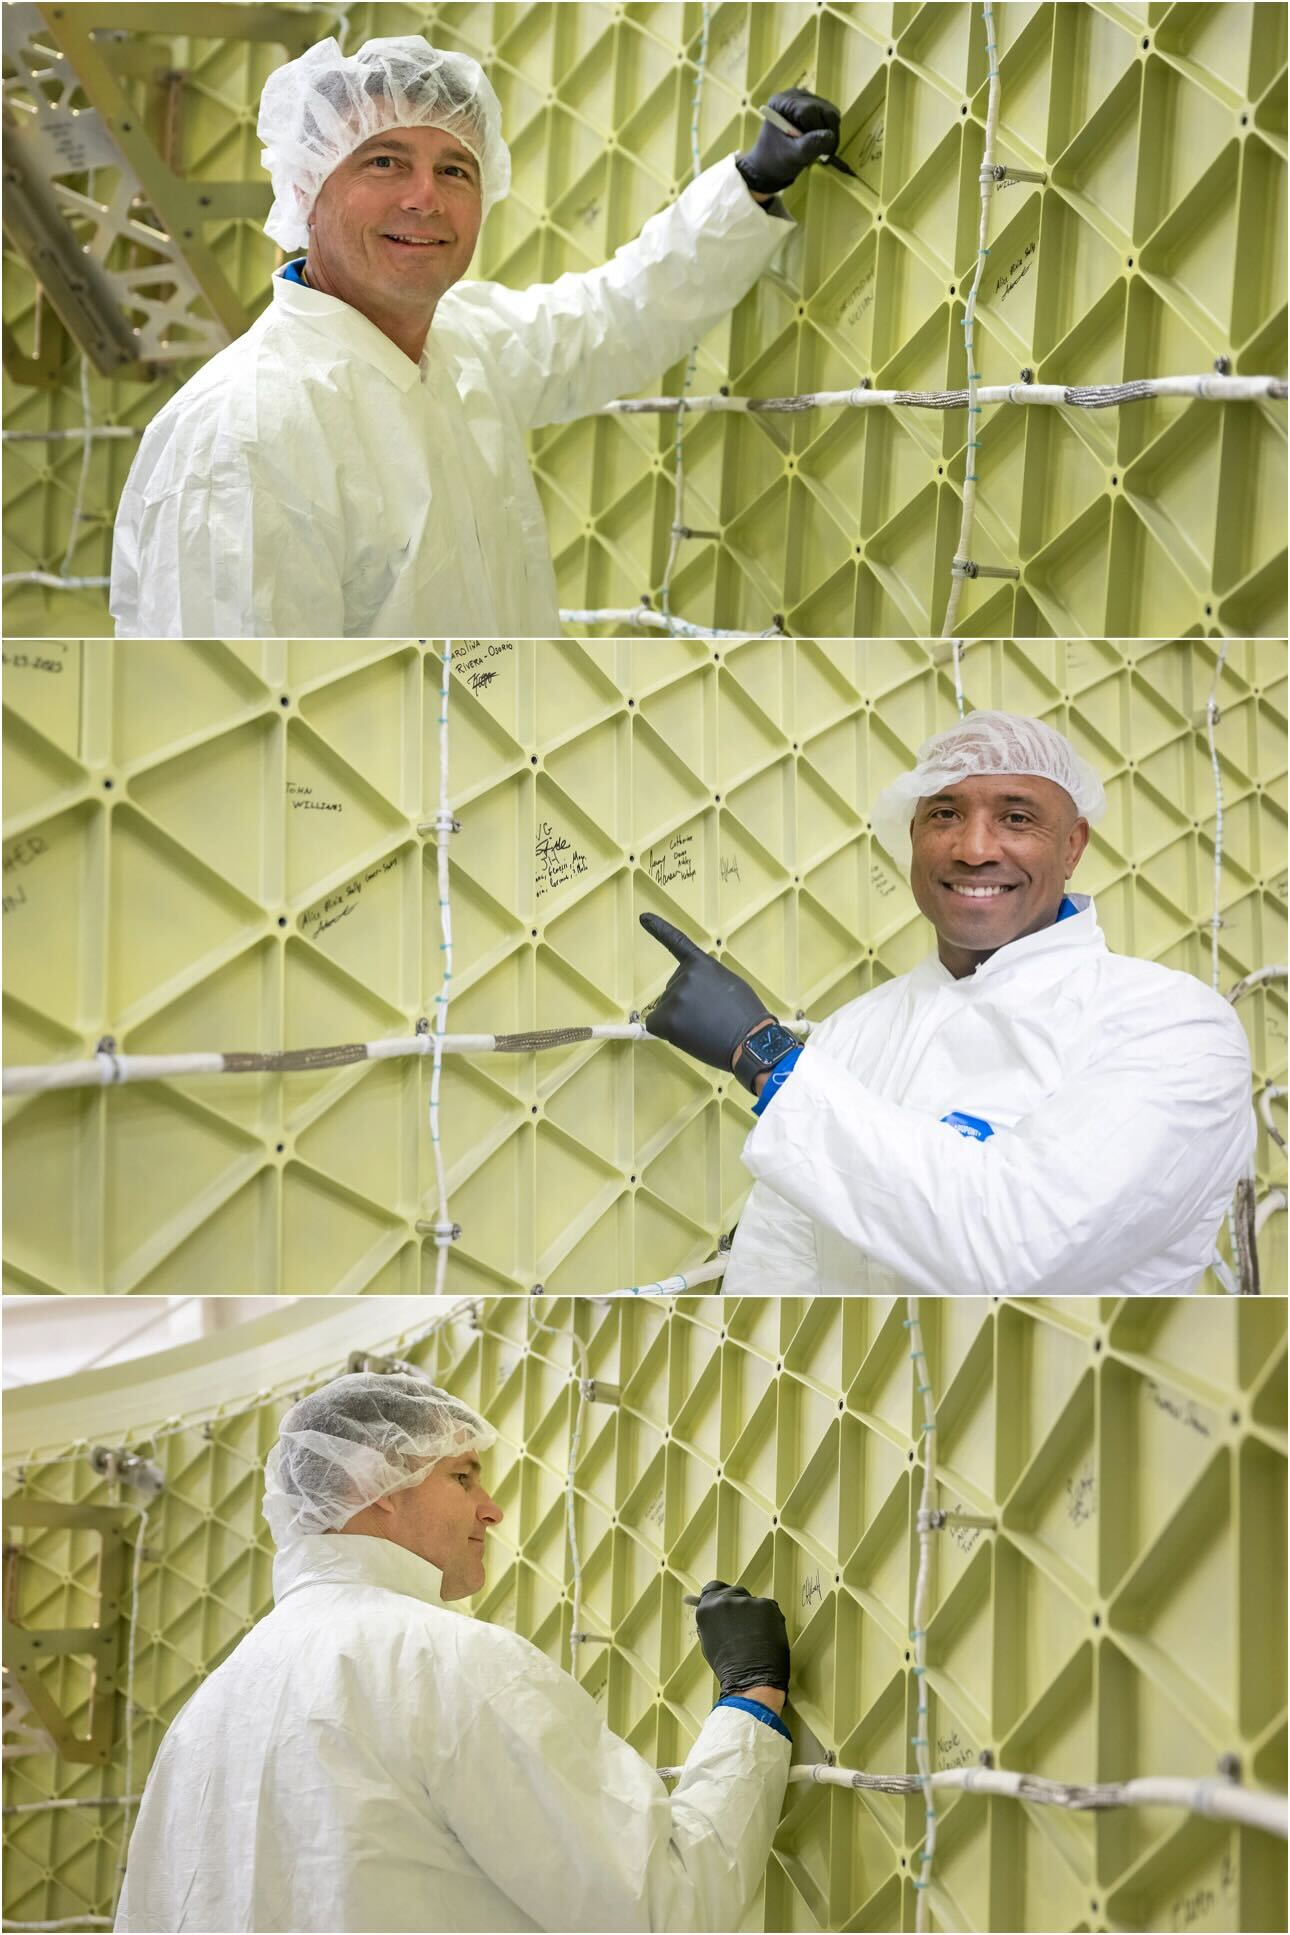 A group of three images shows three men in white coats and hairnets, signing or indicating their signature on the inside of a pale green metal shell with a structural support grid.